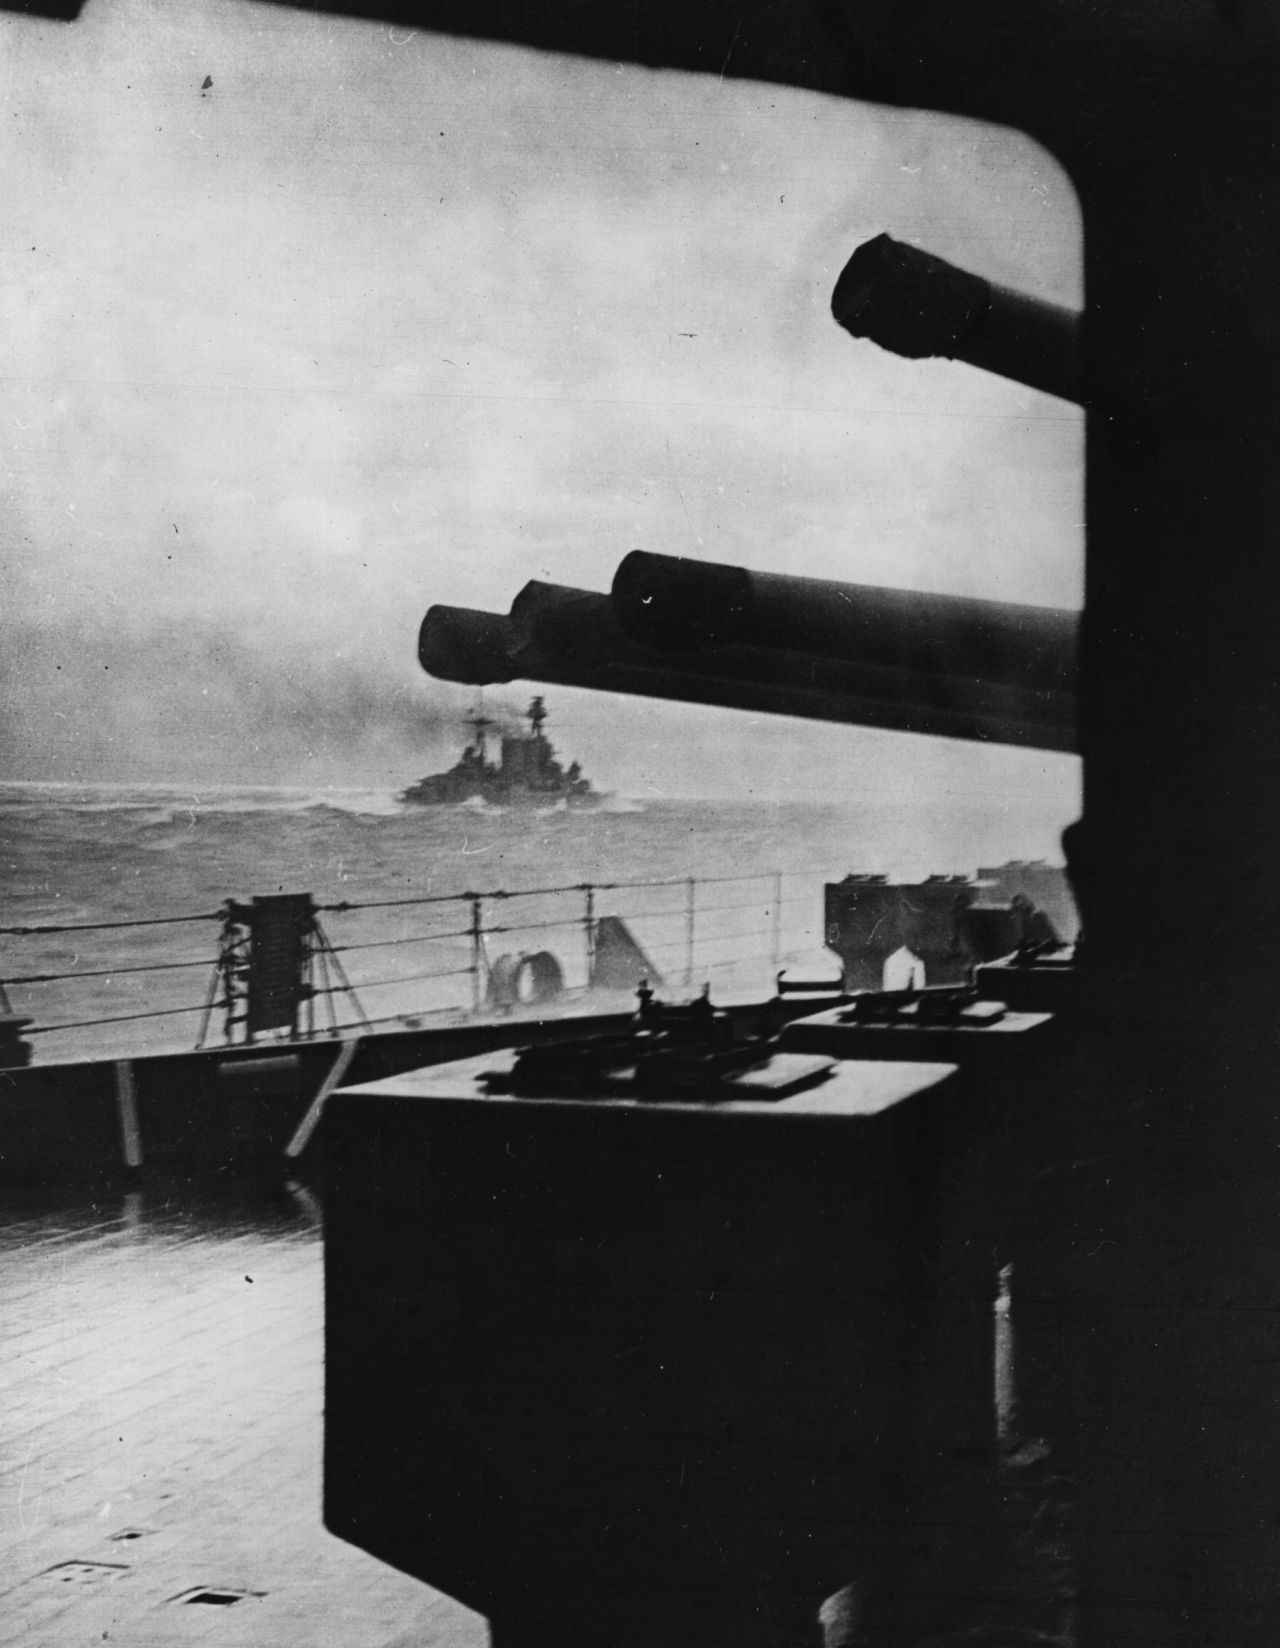 May 5, 1941: The last picture of HMS Hood as seen from HMS Prince of Wales as she went into action against the German battleship Bismarck